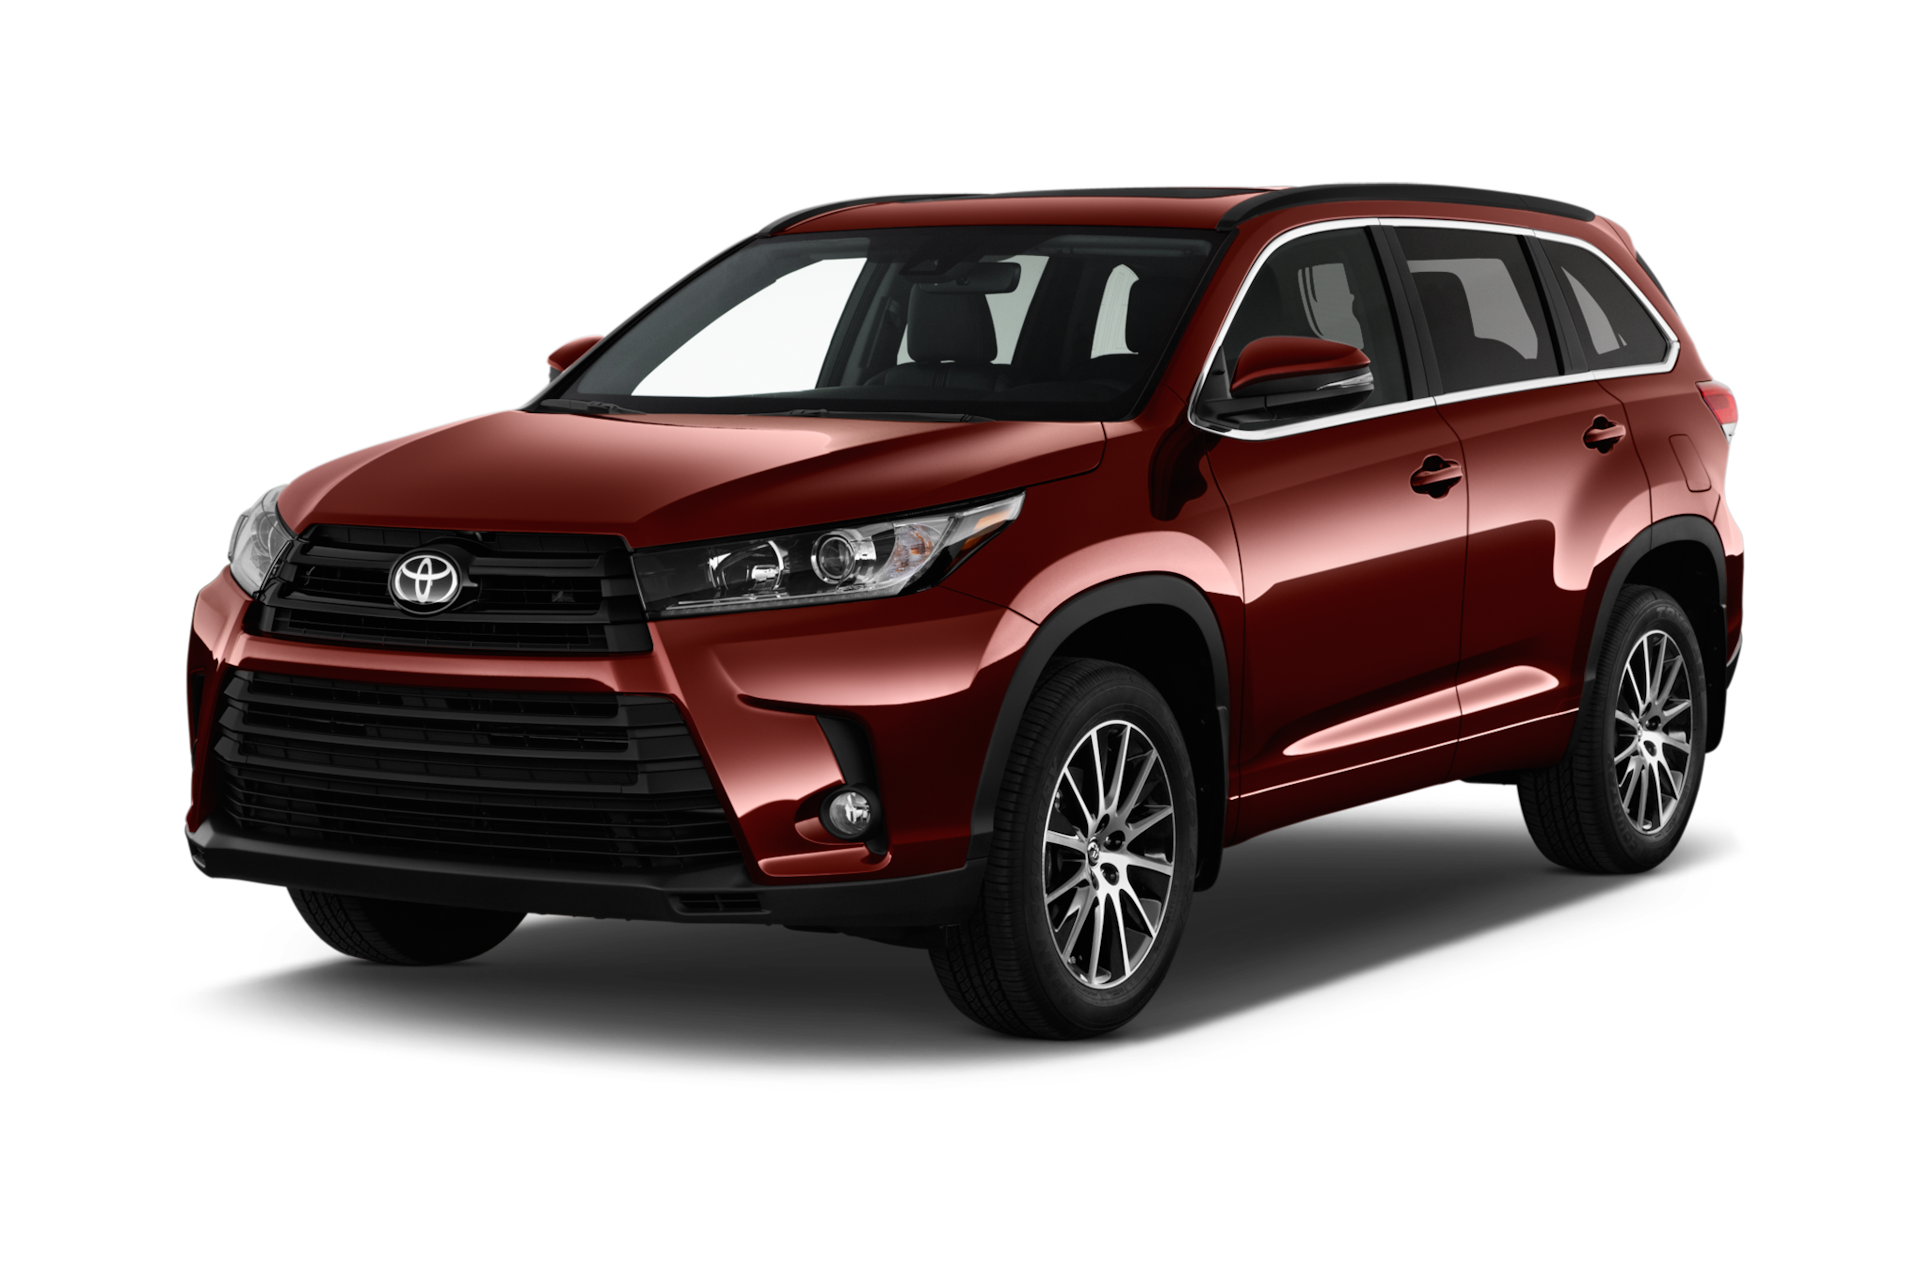 2018 Toyota Highlander Hybrid Prices, Reviews, and Photos - MotorTrend